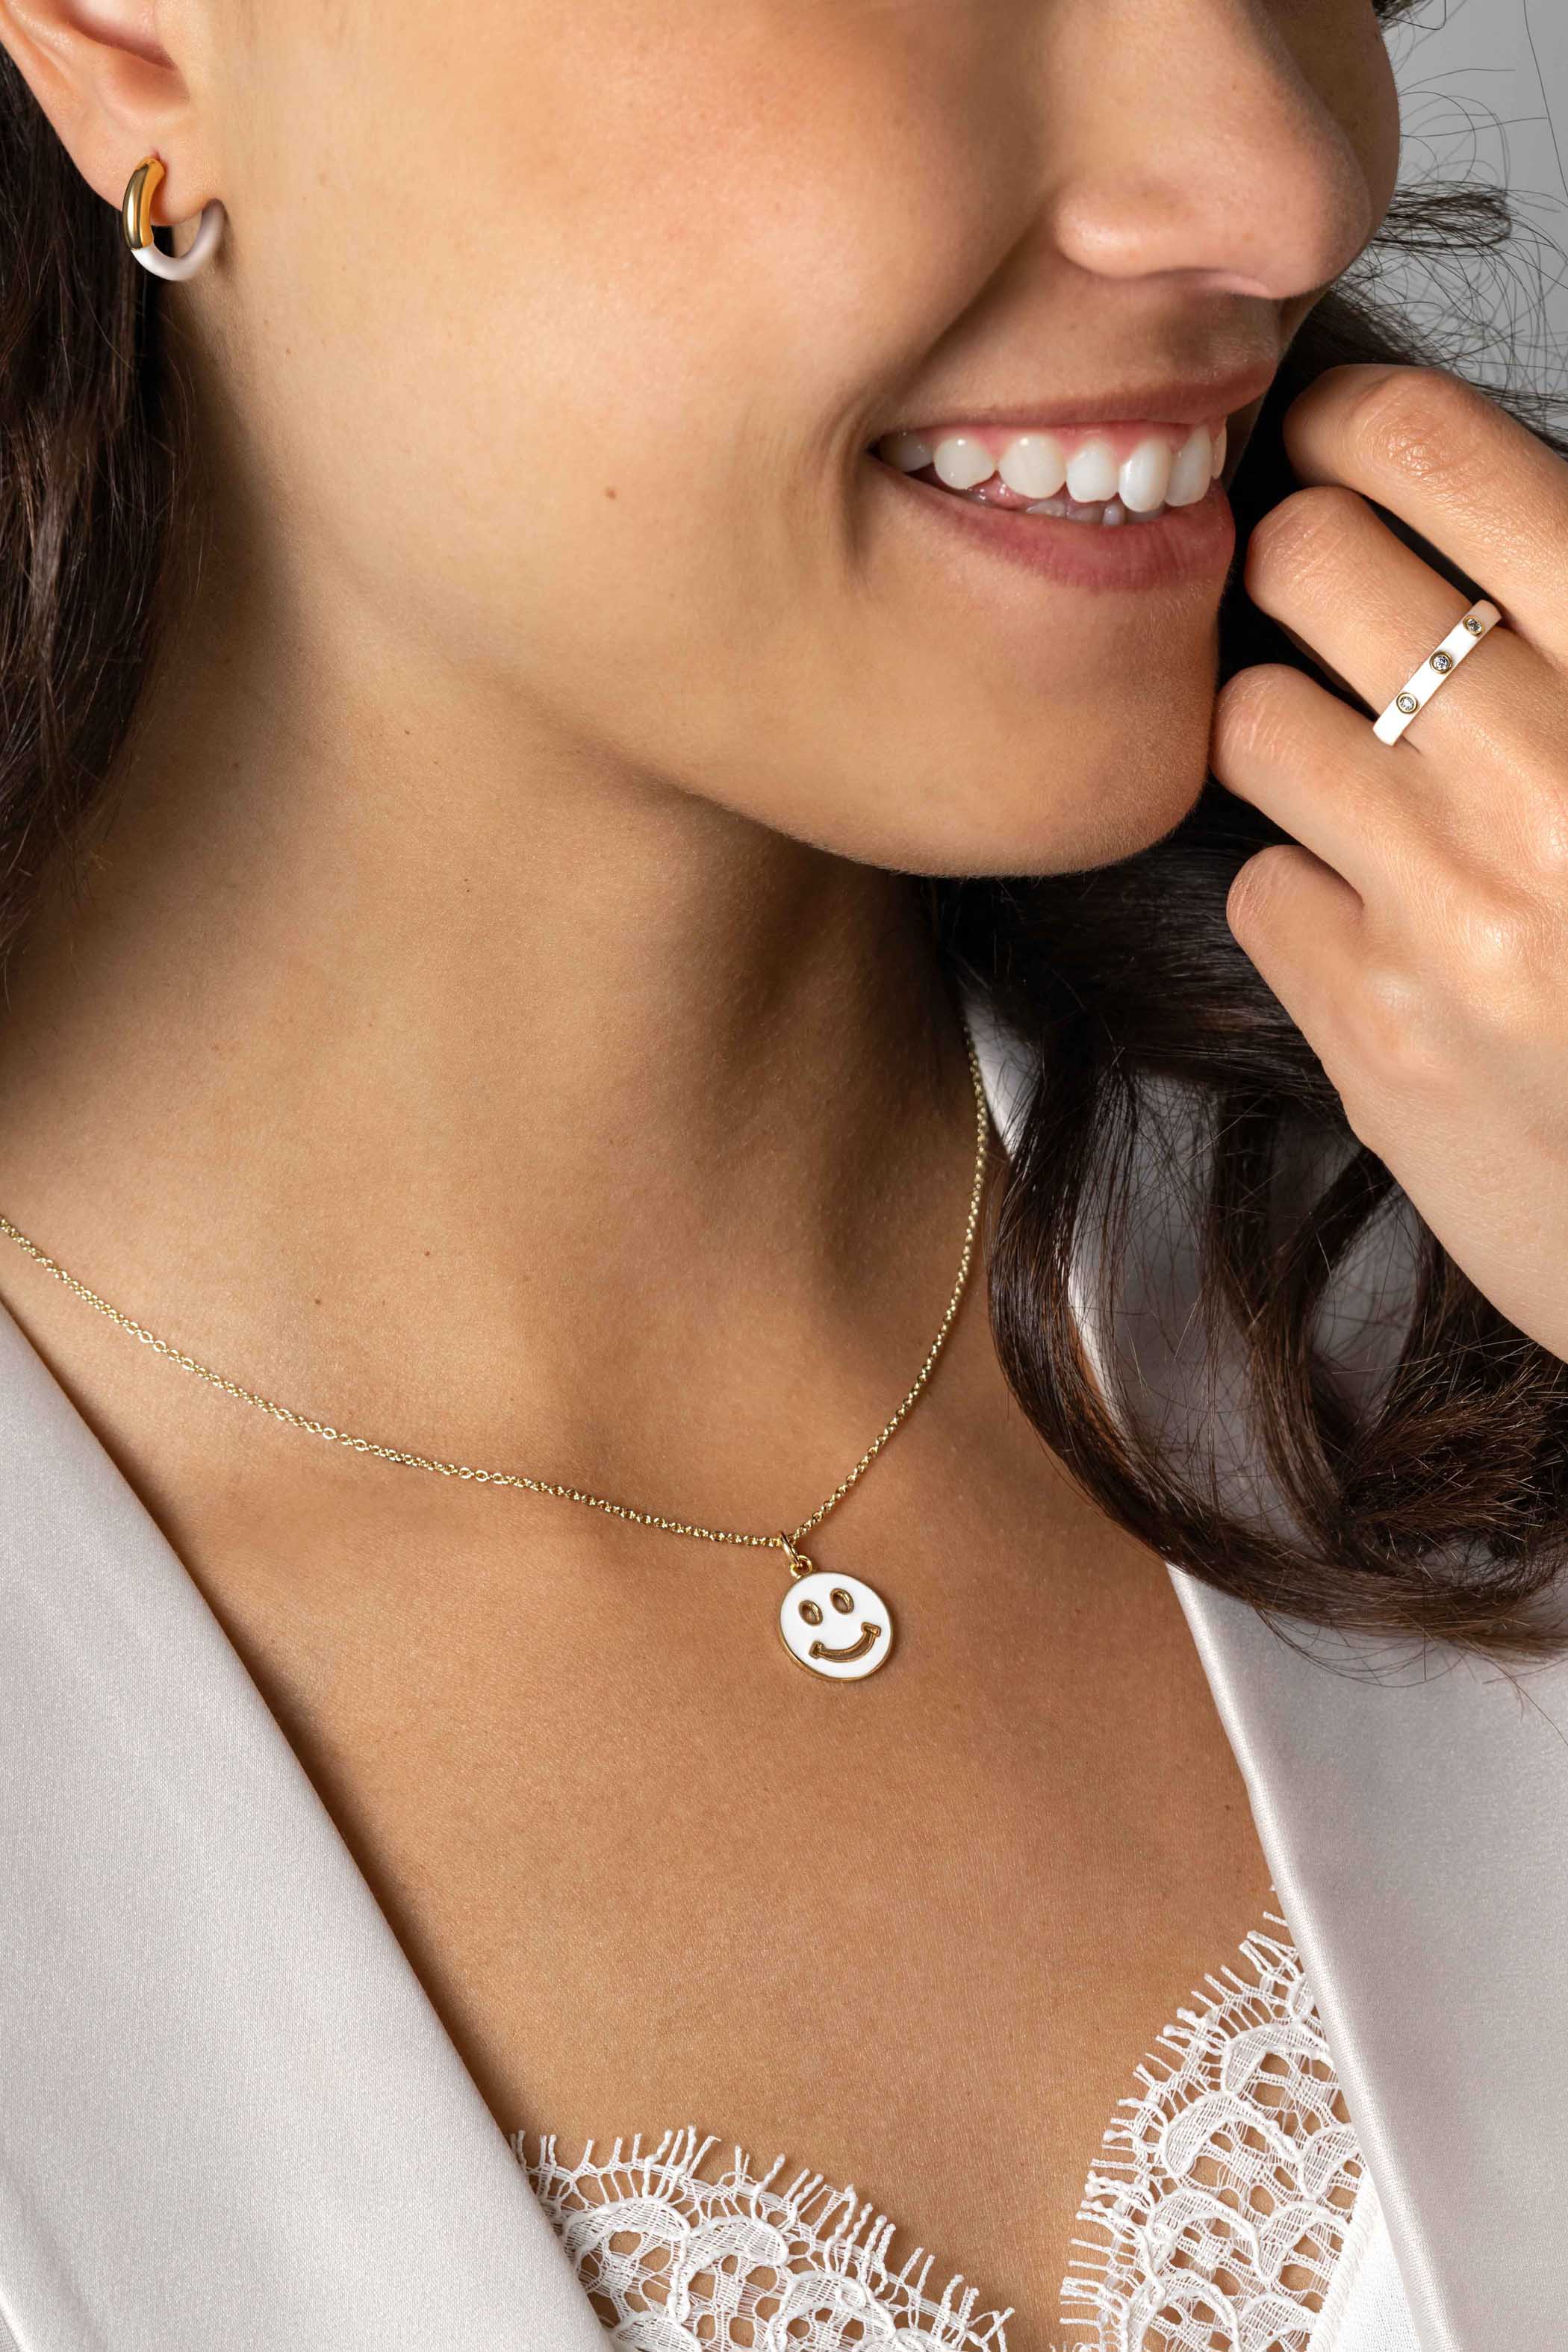 15mm ZINZI Gold Plated Sterling Silver Pendant Smiley Round with White Enamel ZIH2312W (excl. necklace)